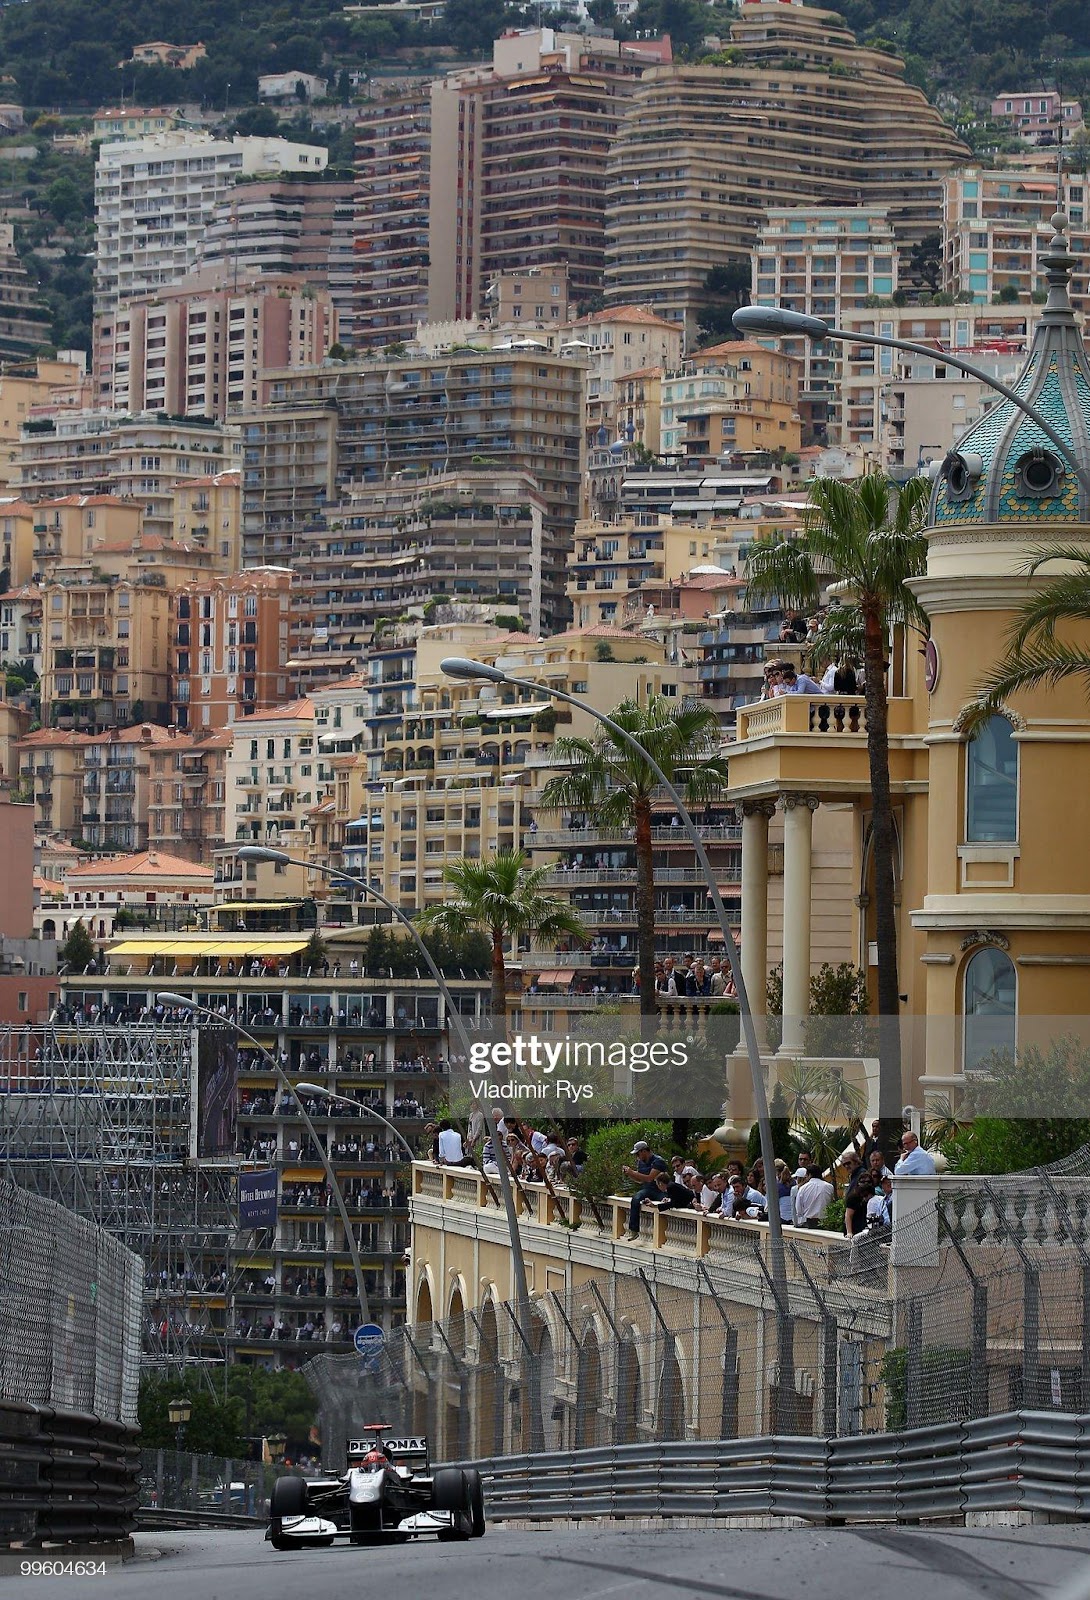 Michael Schumacher, Mercedes GP, drives during the Monaco Formula One Grand Prix at the Monte Carlo Circuit on May 16, 2010.